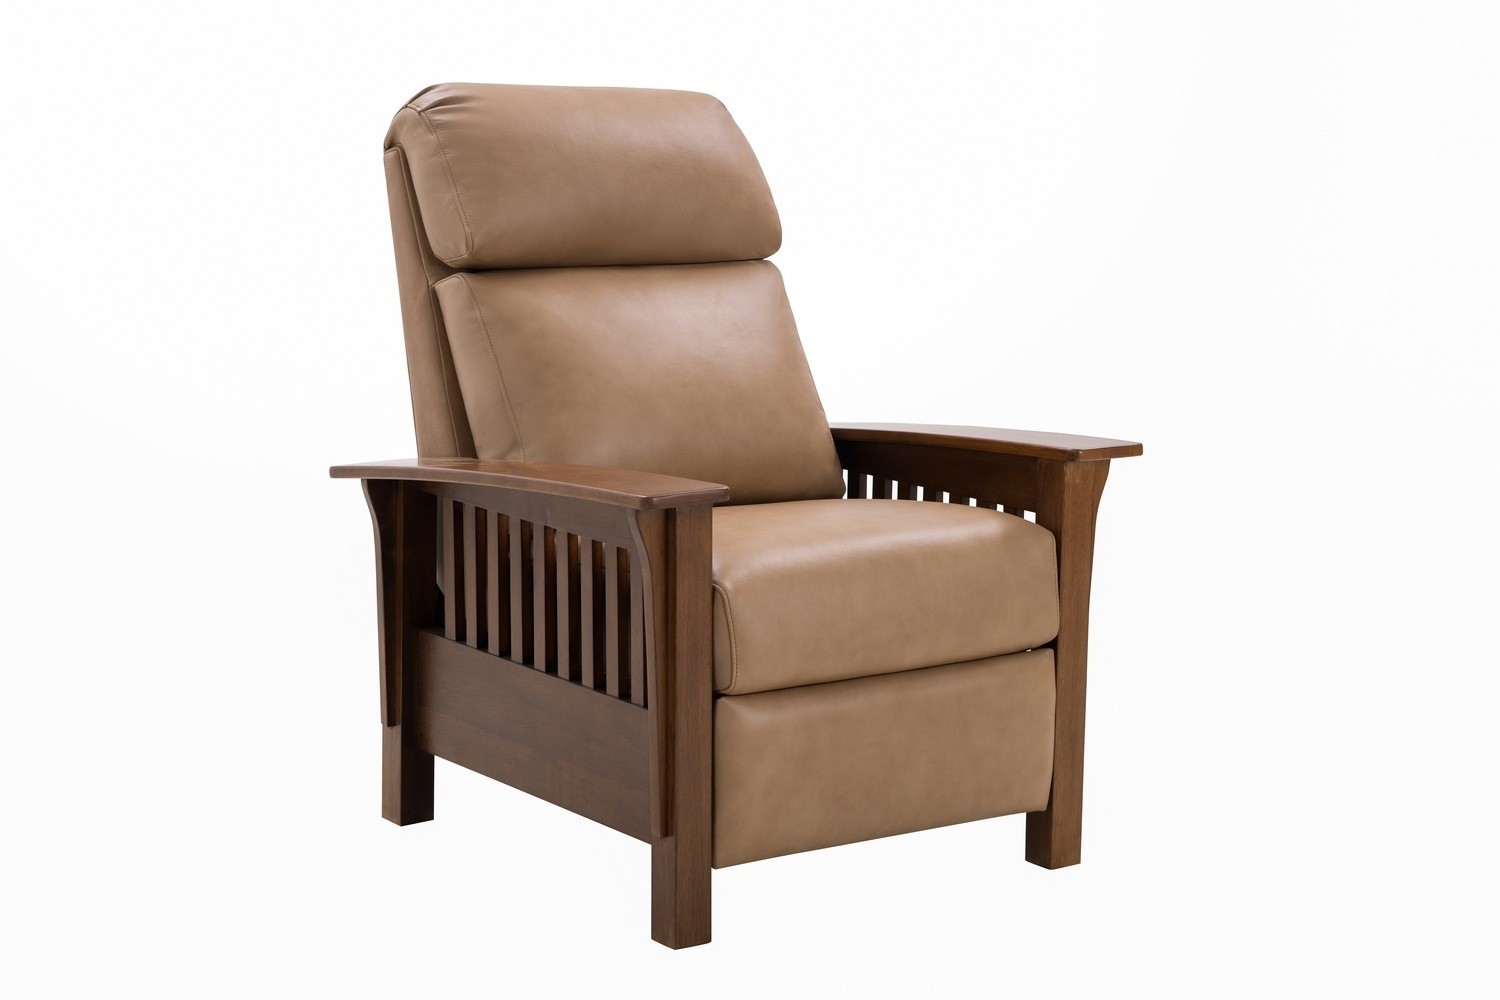 Barcalounger Mission Recliner Chair - Prestin Tuscan Sun/All Leather